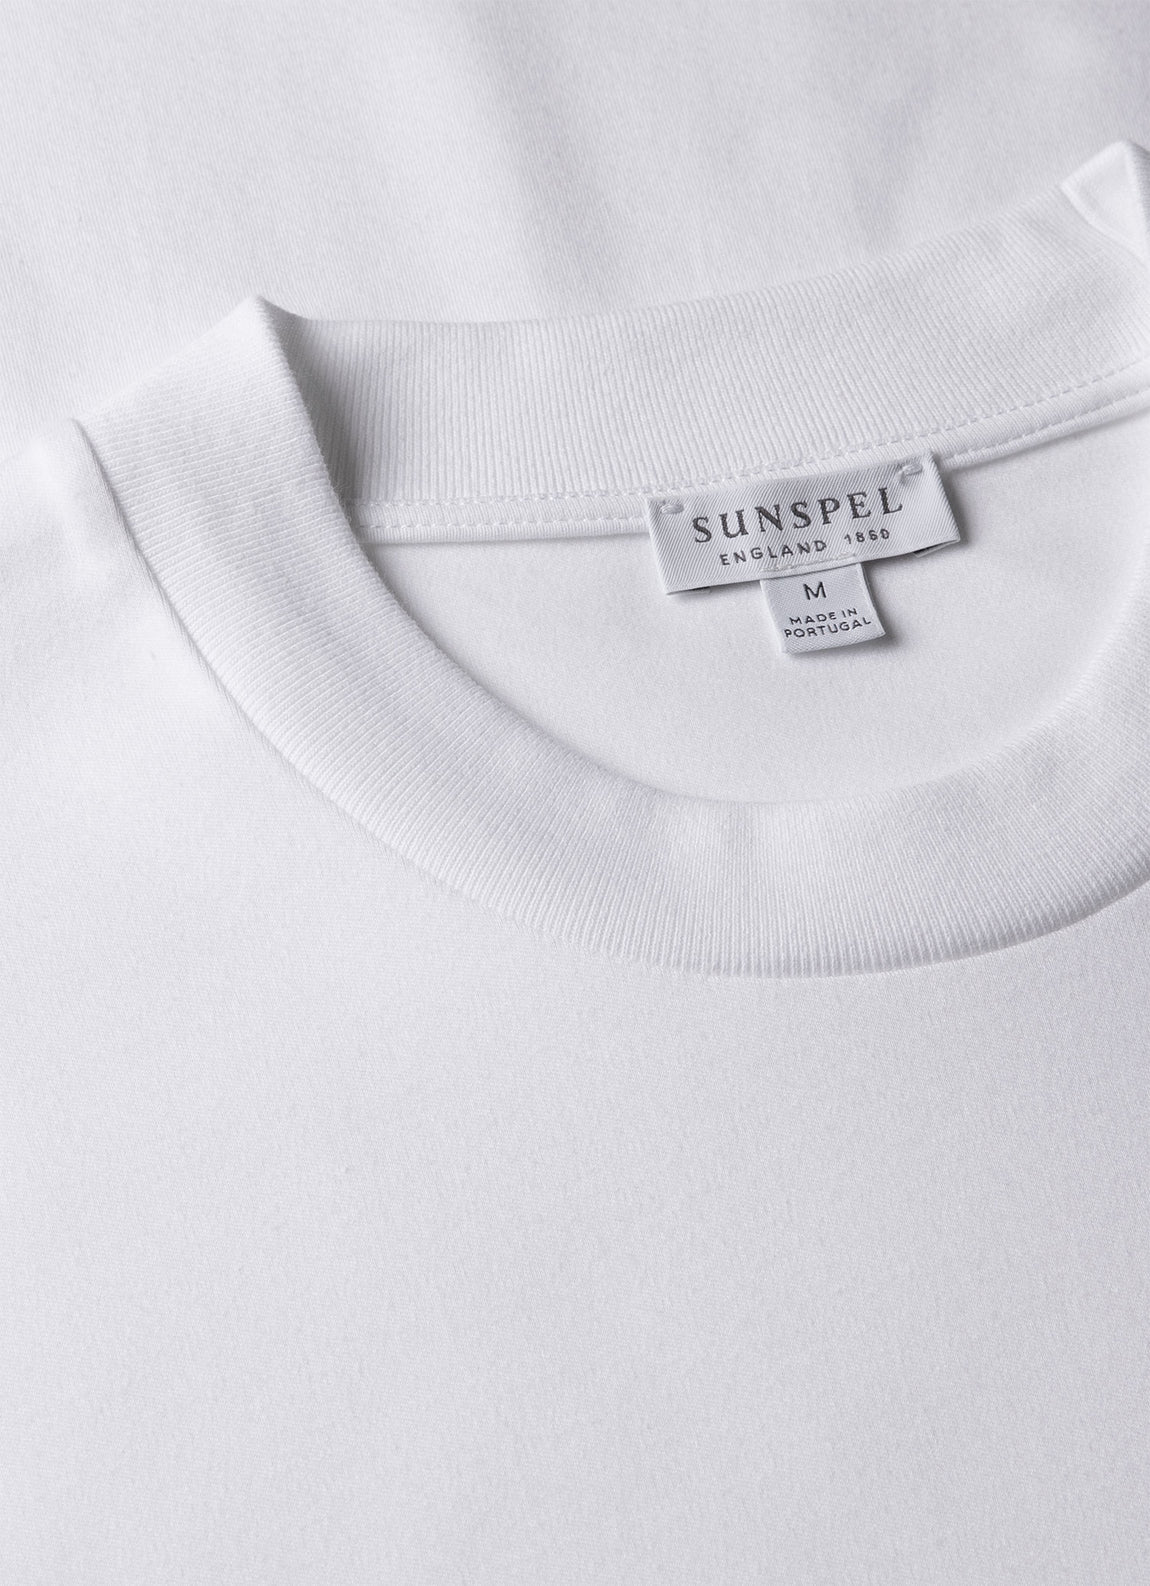 Men's Relaxed Fit Heavyweight T-shirt in White | Sunspel